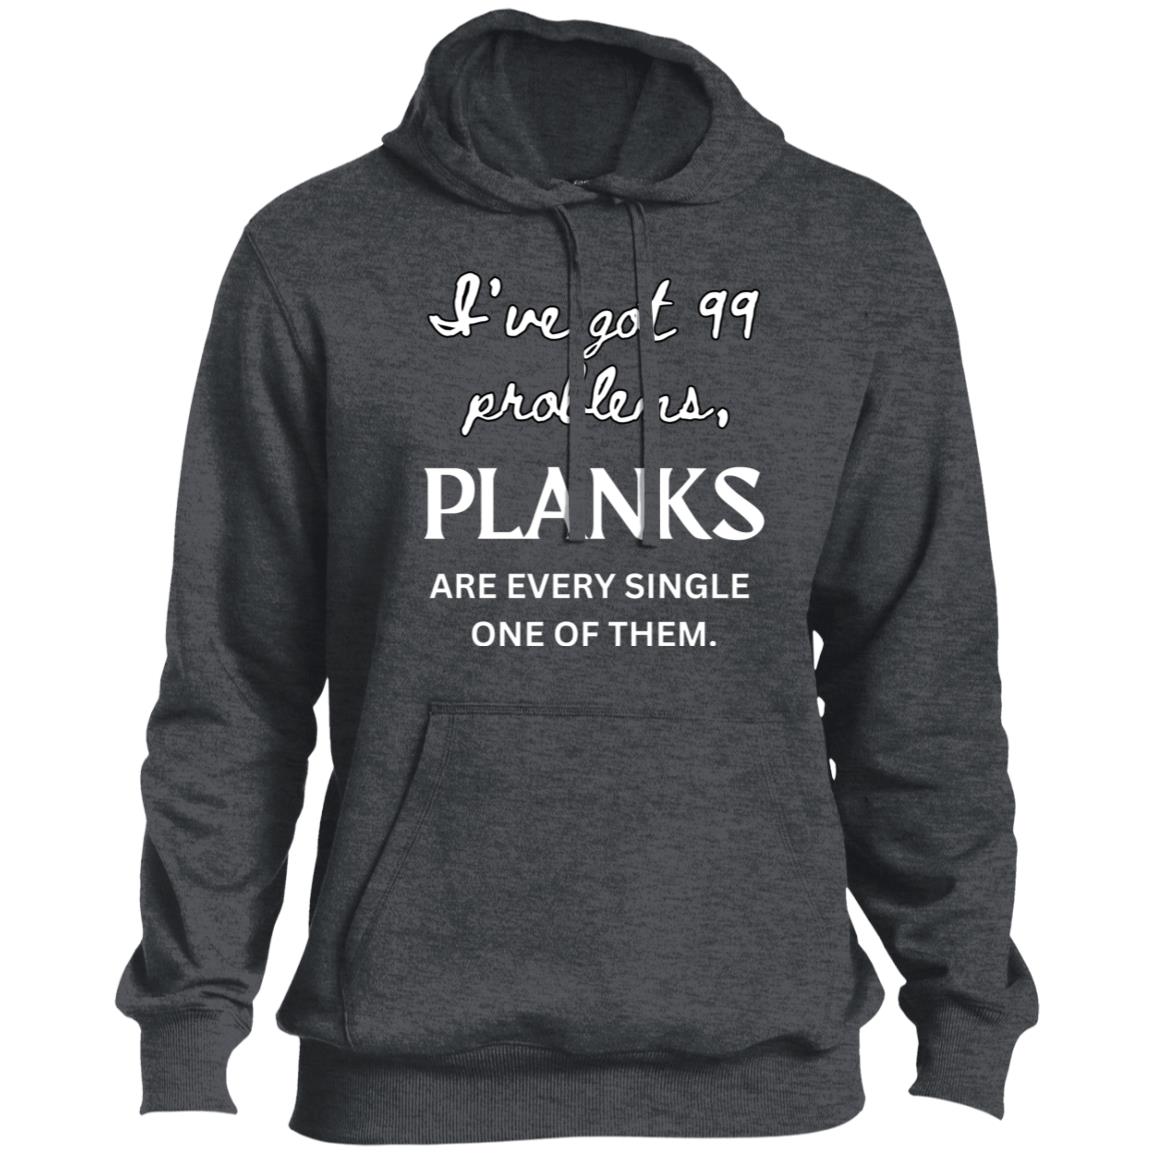 HOODED PLANK CHALLENGES Pullover Hoodie